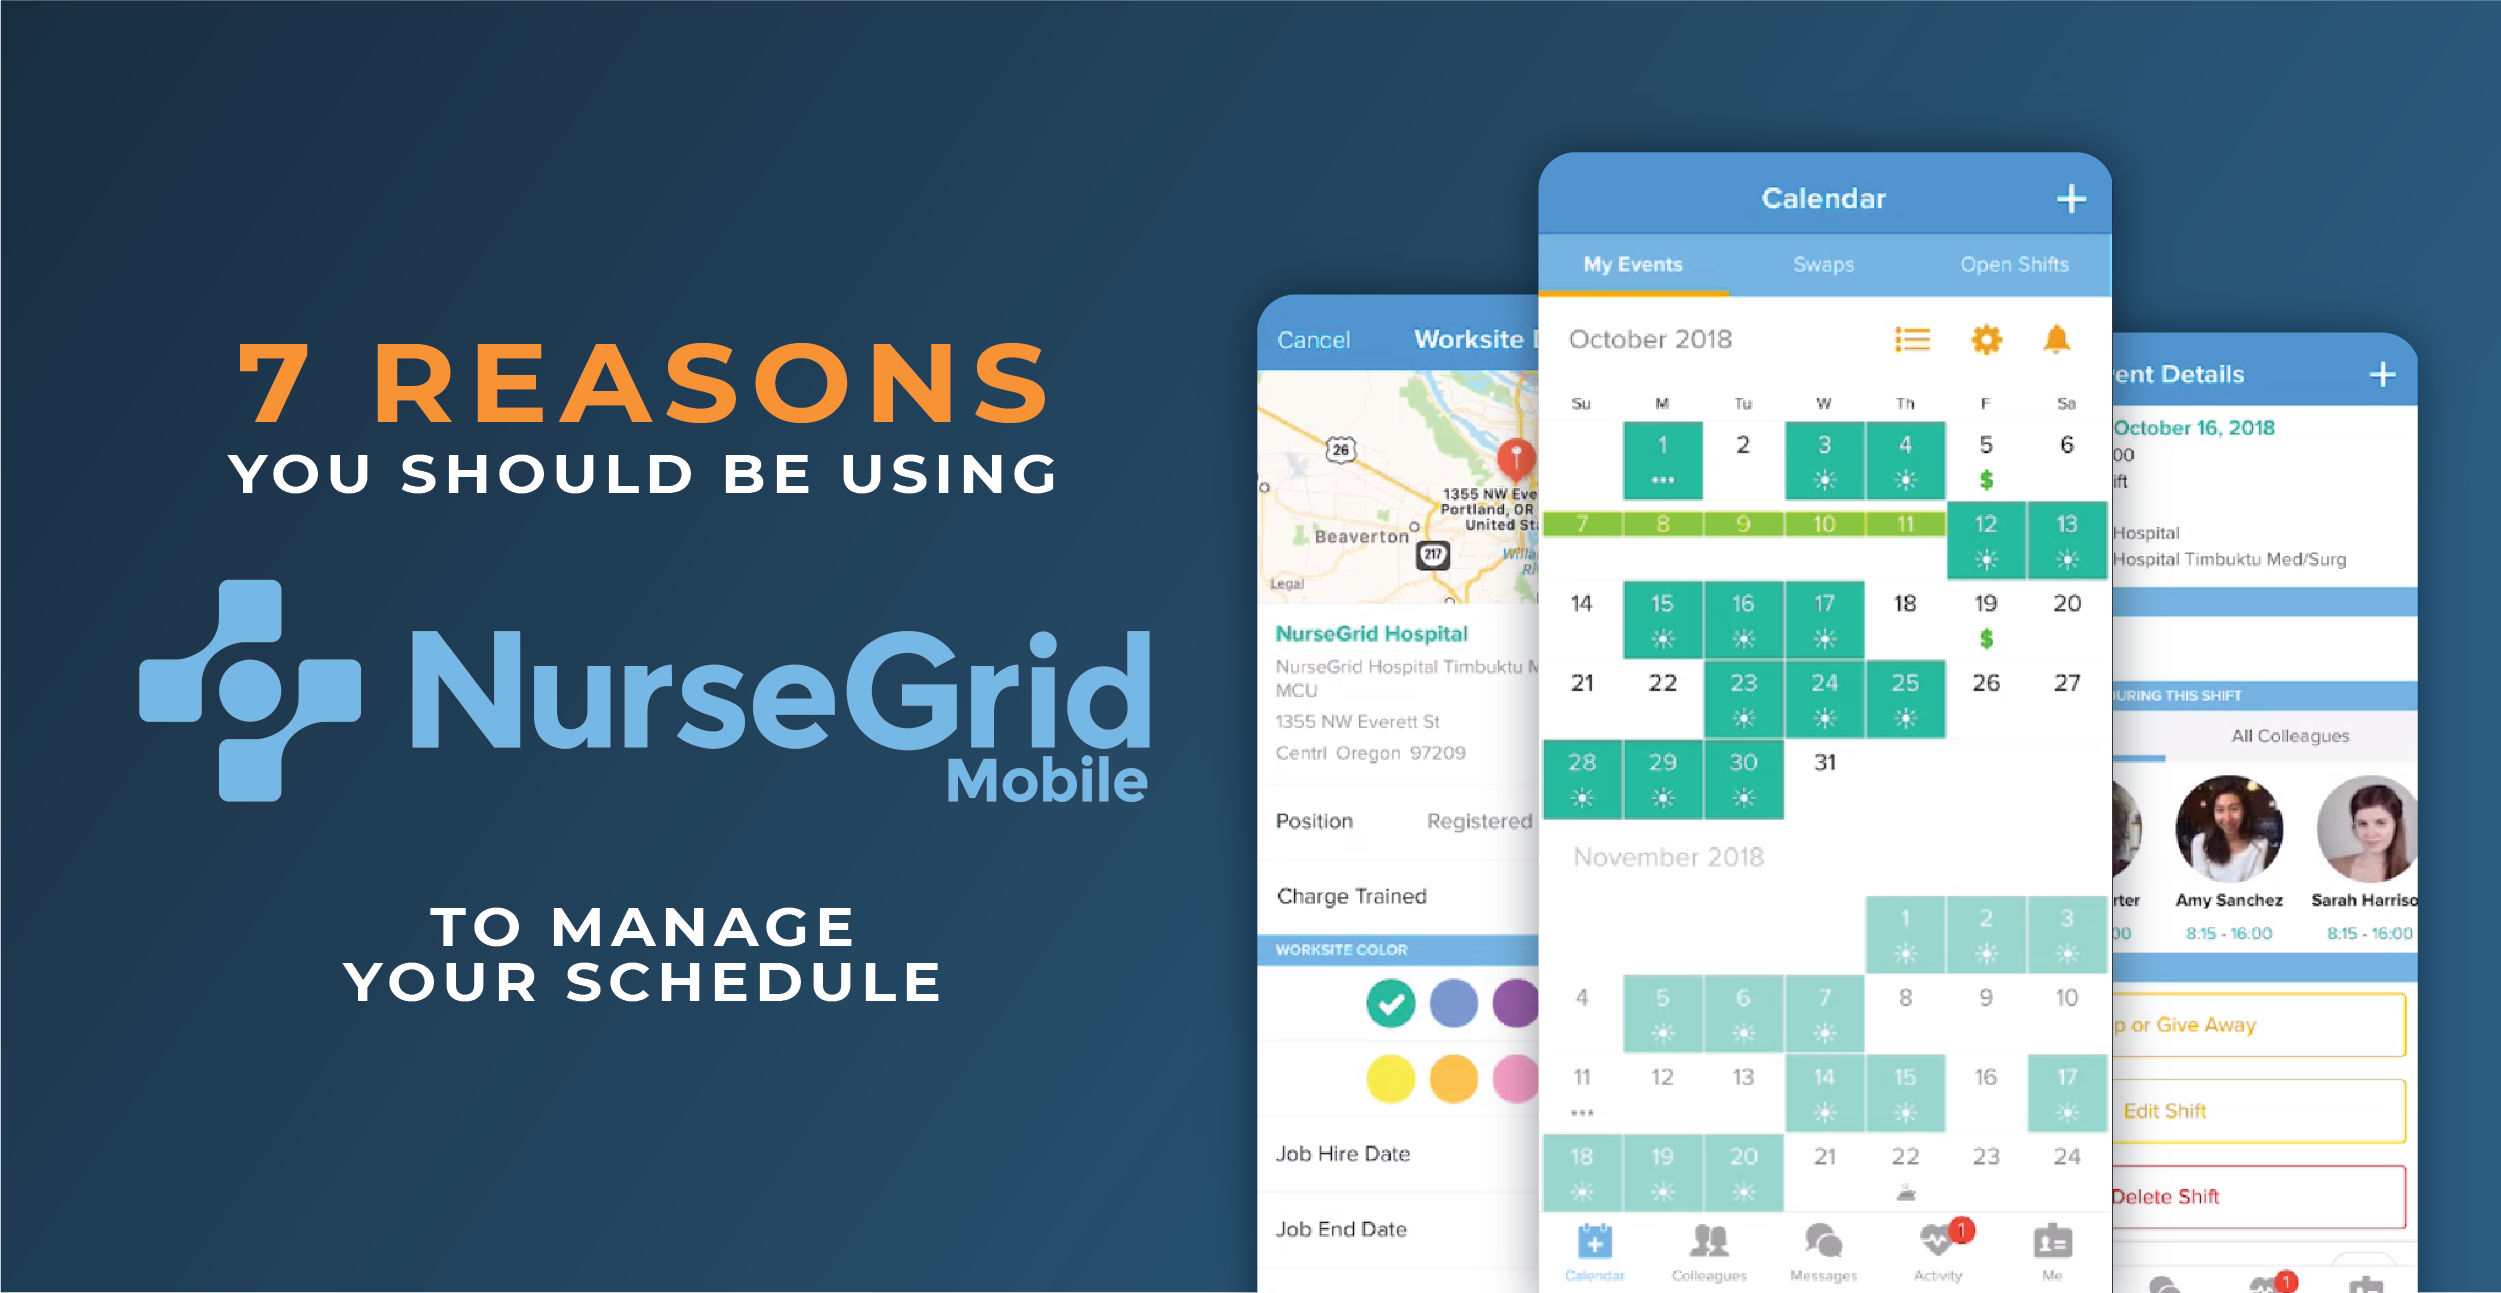 7 Reasons to Manage Your Schedule with Nursegrid